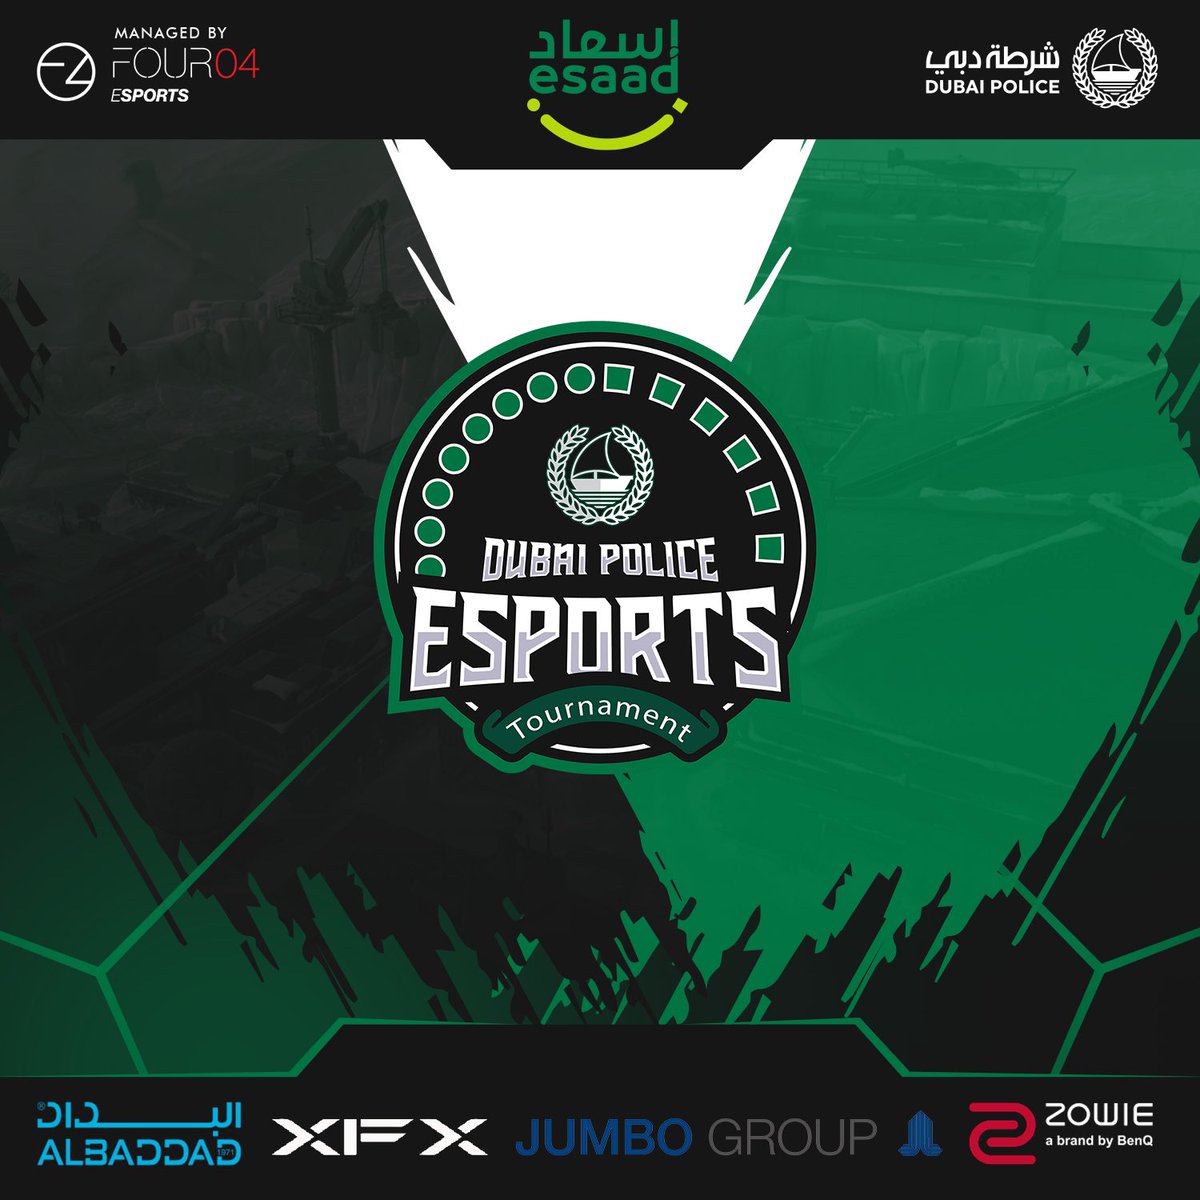 Four04 Esports is proud to present, The Dubai Police Esports Tournament back for its 3rd edition! 

Register now with the link in our bio 💪🏼

#uaetournament #dubaiesports #esaad #dubaigamers